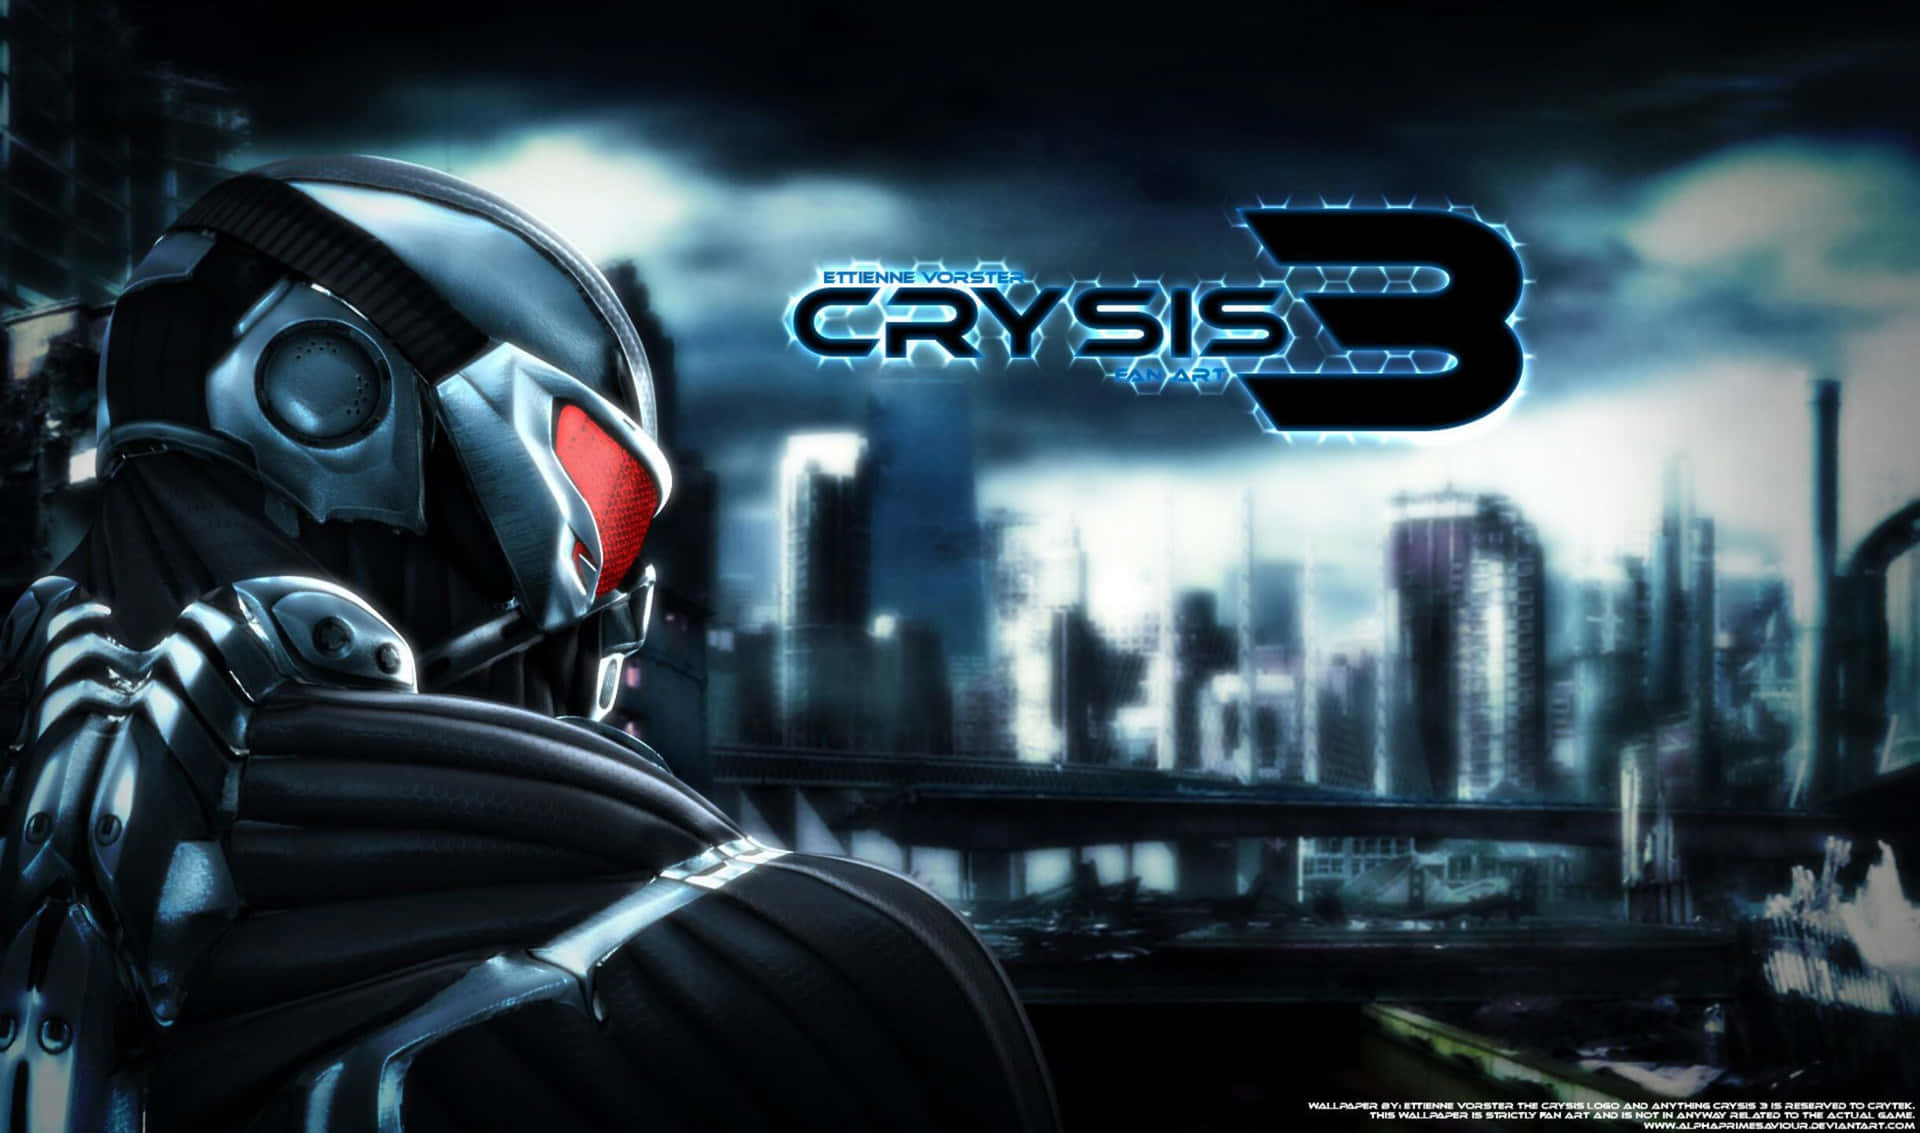 "Fight for Survival in Crysis 3"